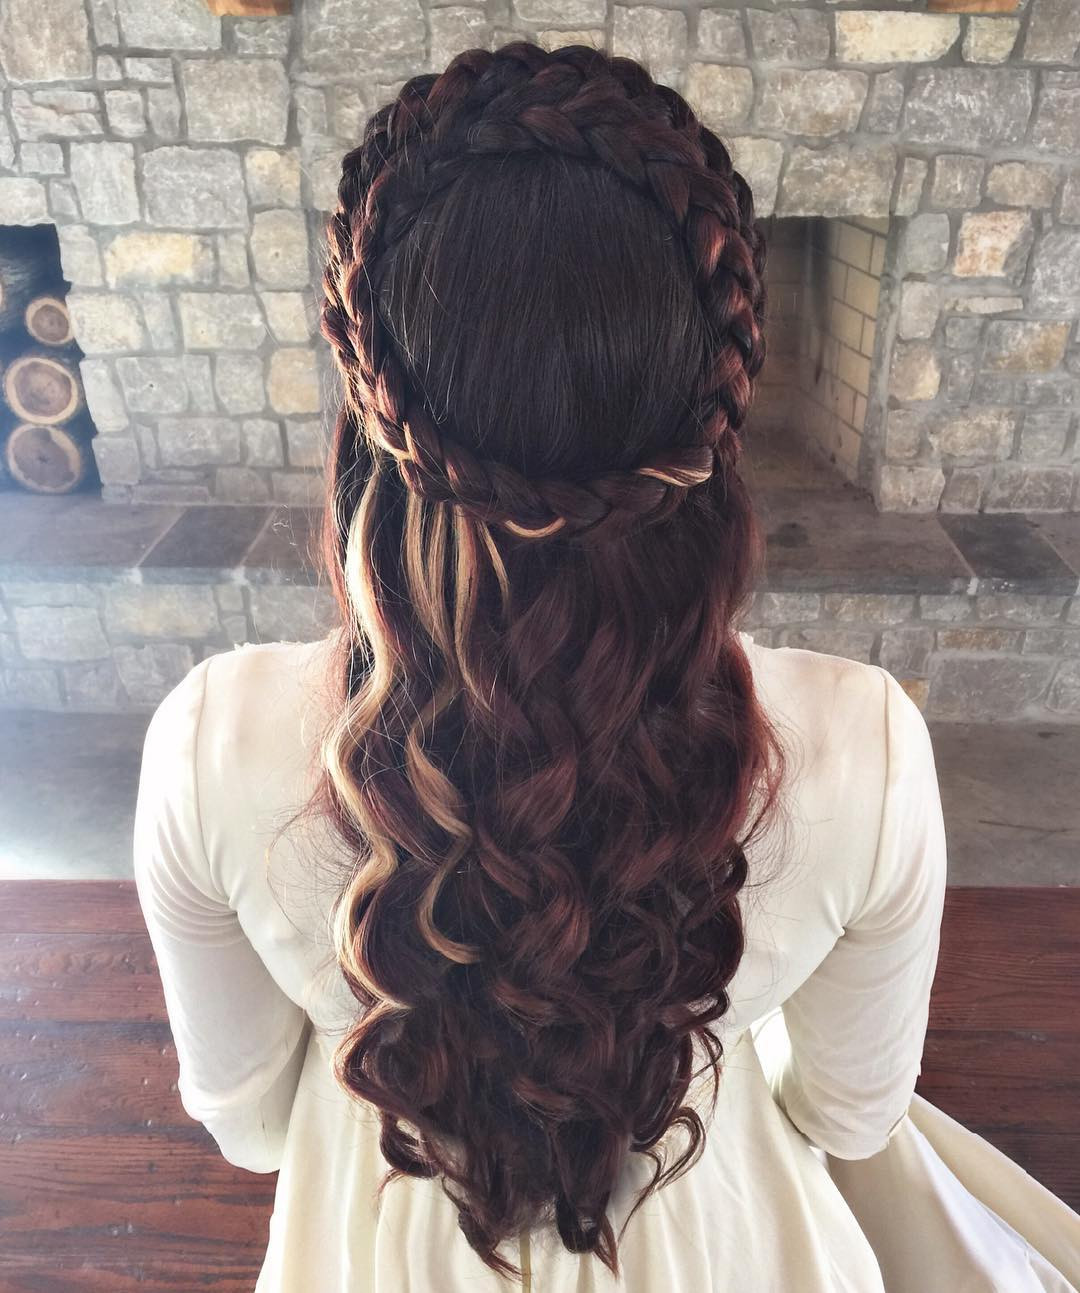 Easy Renaissance Hairstyles
 24 Beautiful Me val Hairstyles